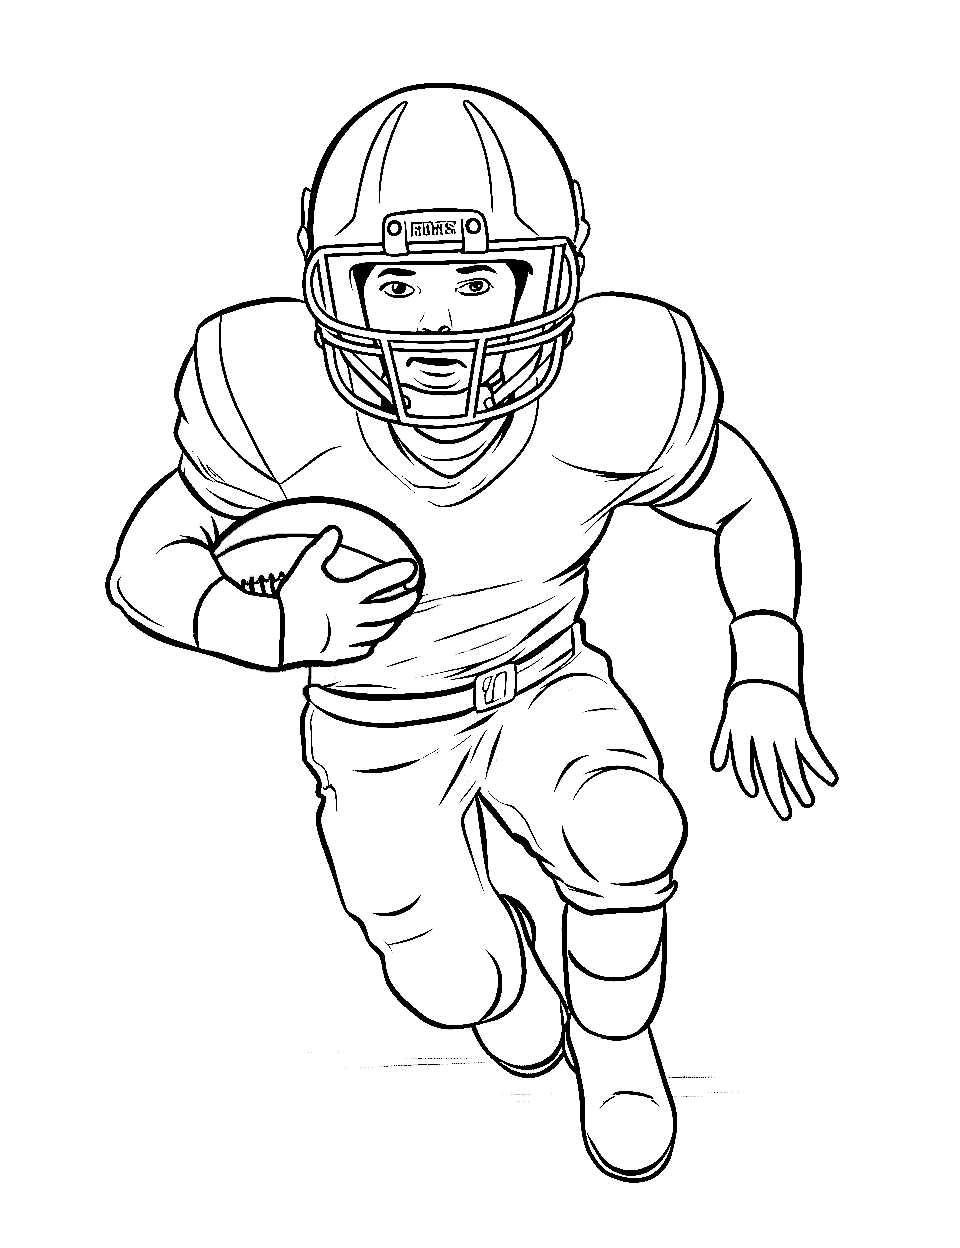 football players coloring pages